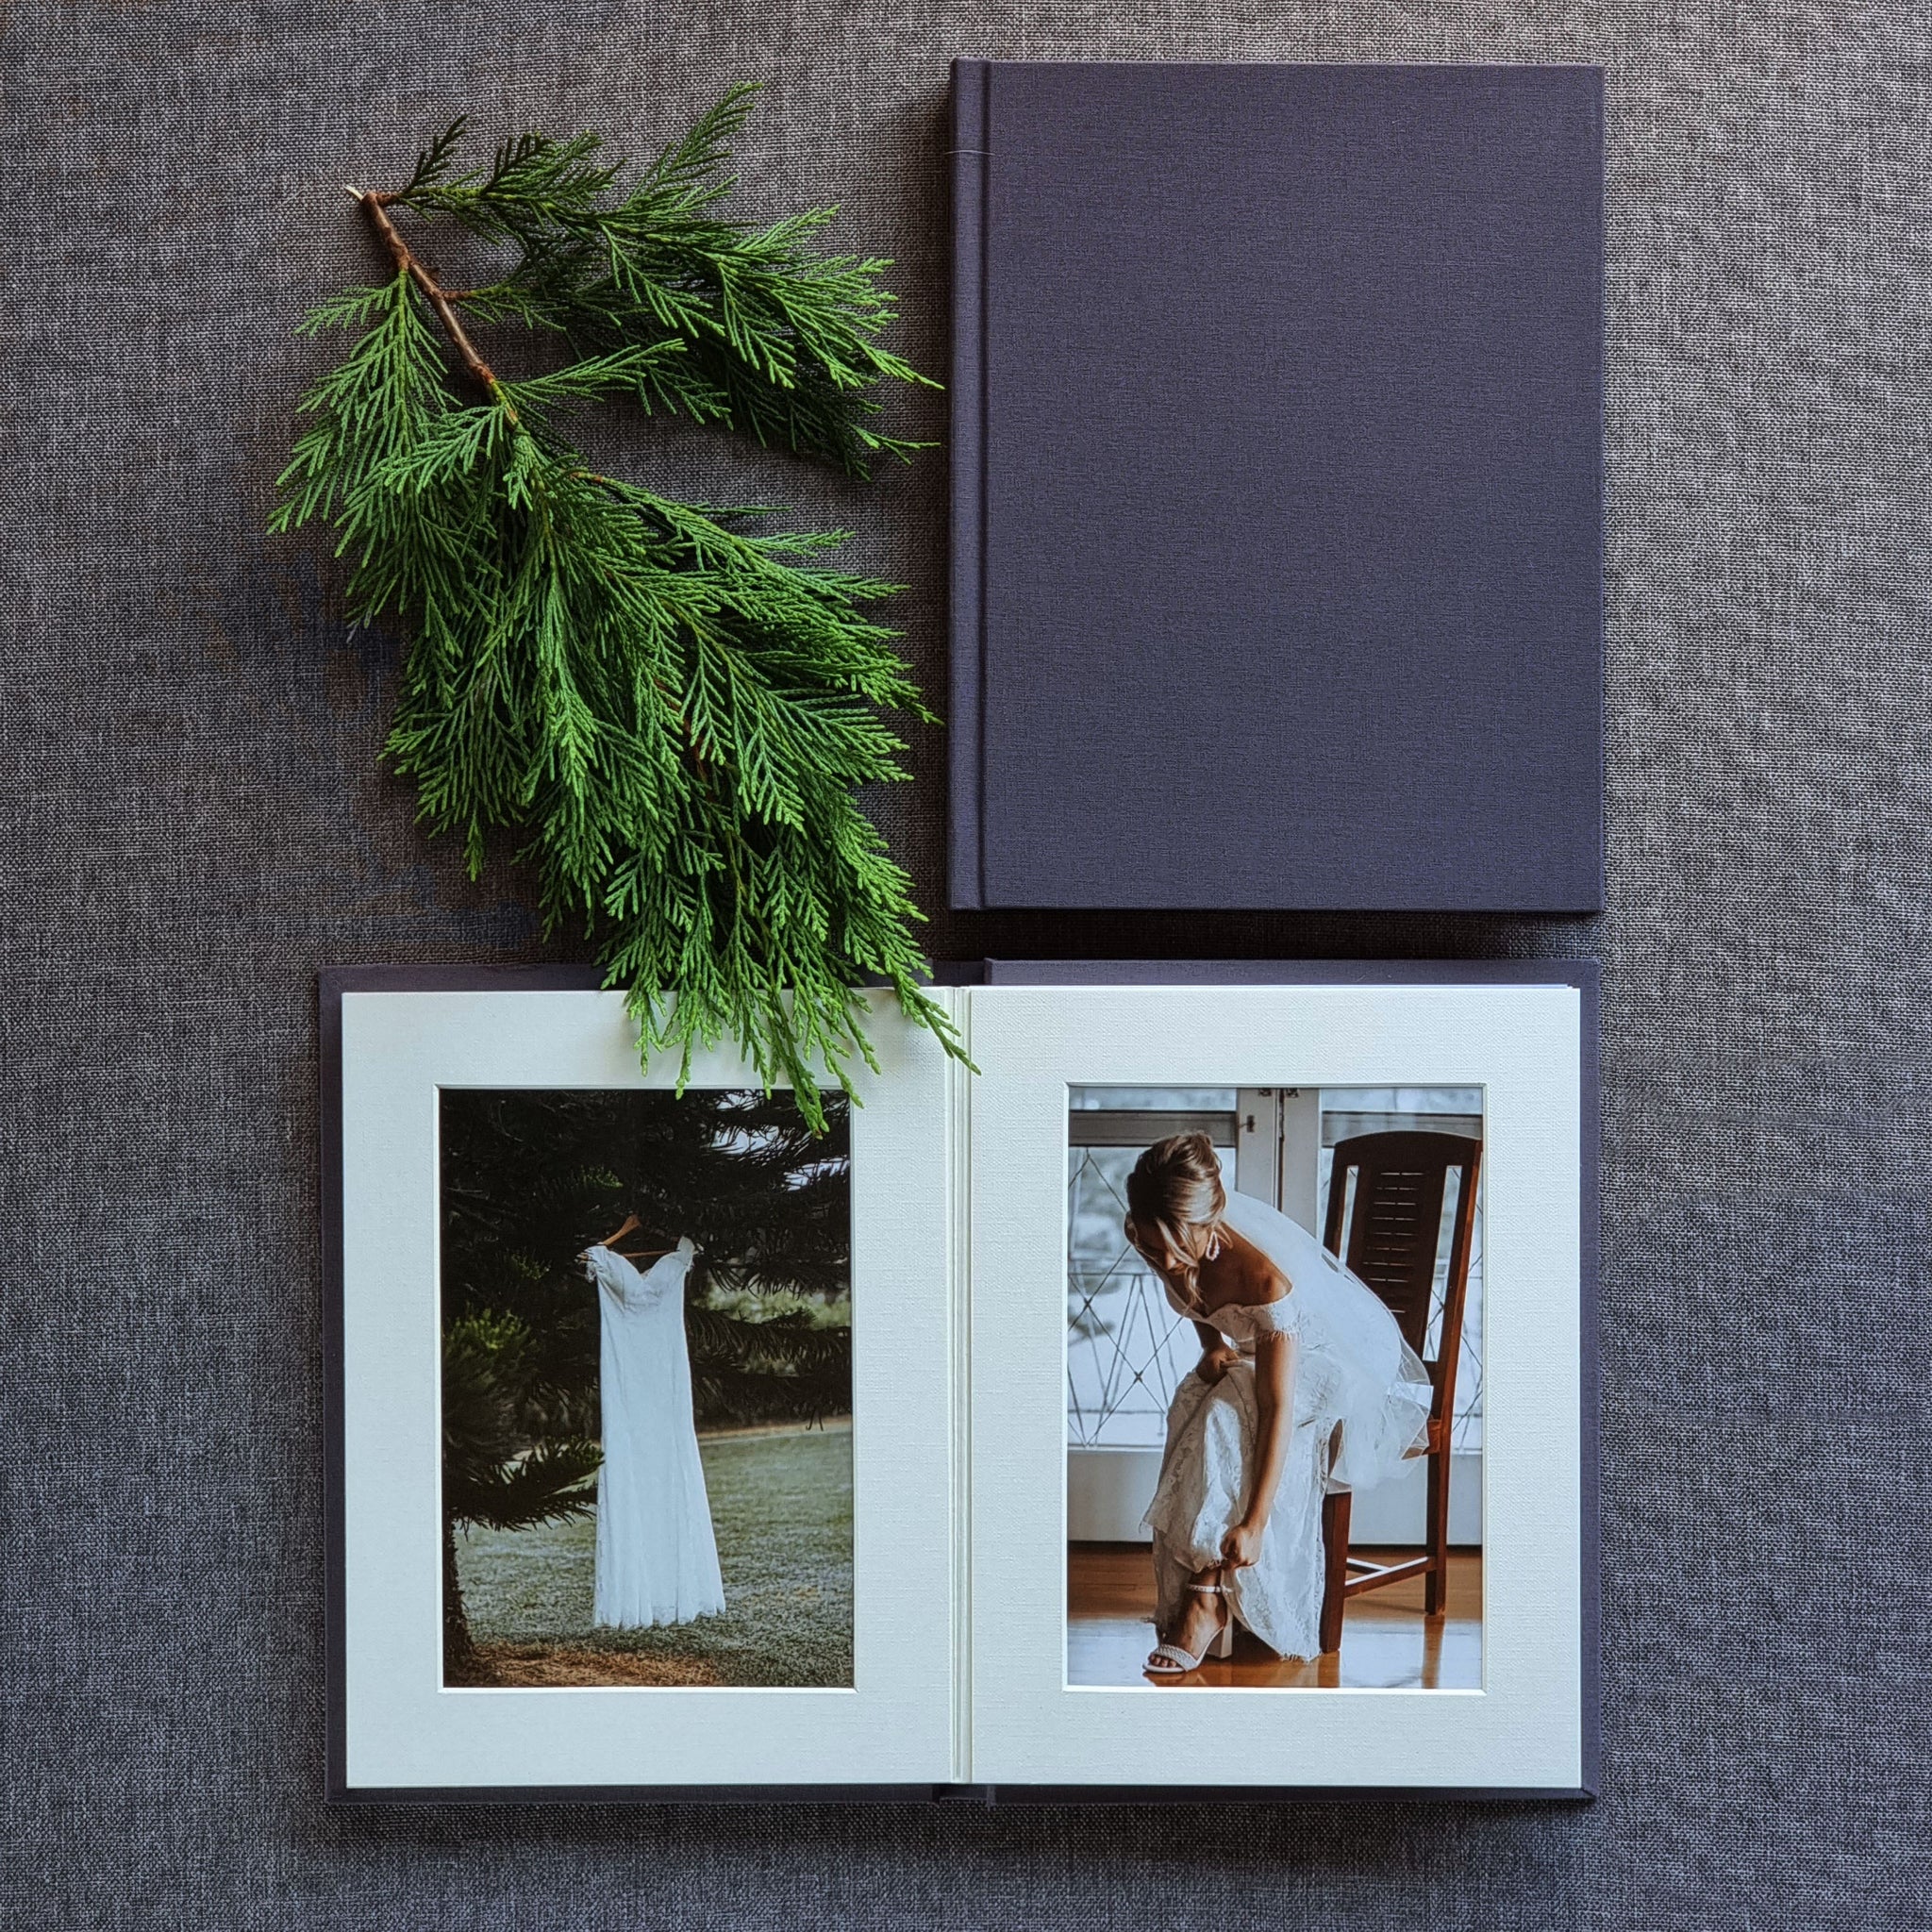 Matted Photo Album: 5x7 - Create your own Unique Cover Designs - The  Photographer's Toolbox